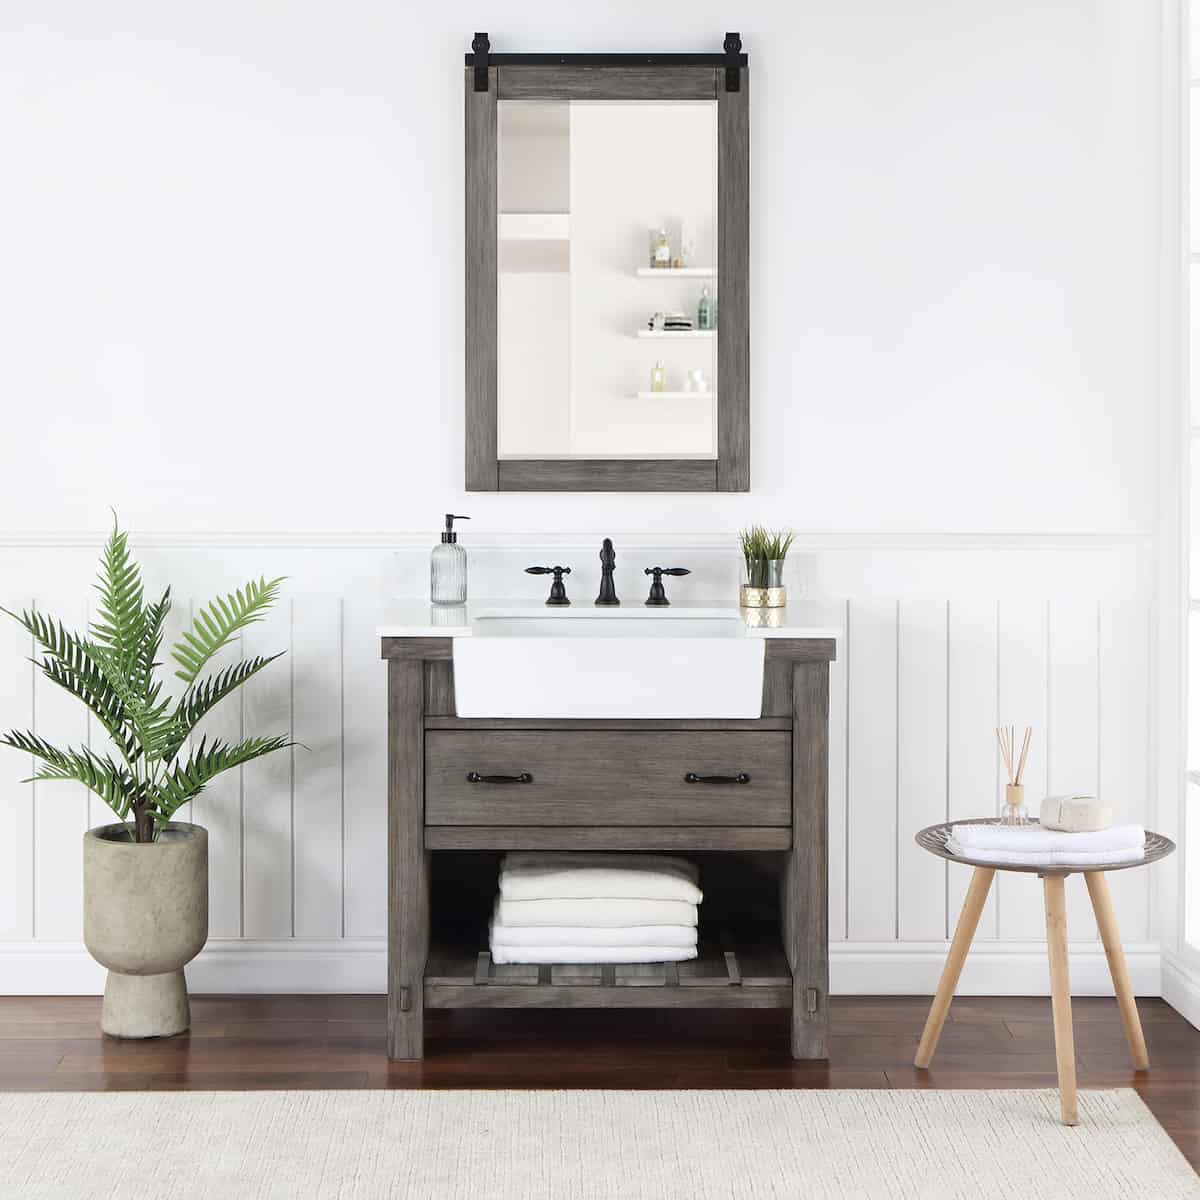 Vinnova-Villareal-36-Inch-Freestanding-Single-Bath-Vanity-in-Classical-Grey-with-Composite-Stone-Top-in-White-with-White-Farmhouse-Basin-With-Mirror-in-Bathroom-701636-CR-GW